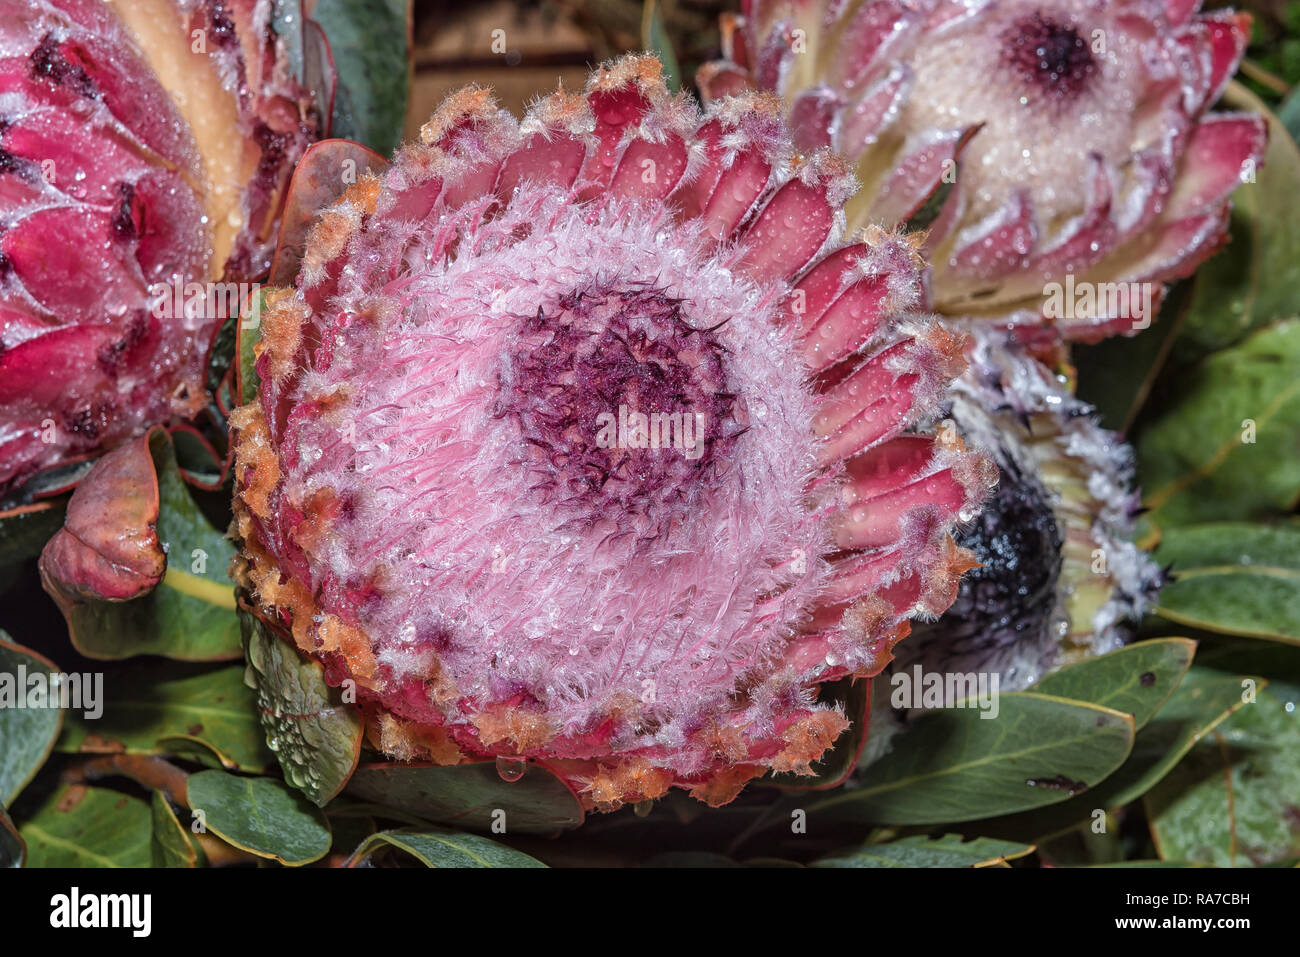 Details of a protea flower in Clanwilliam in the Western Cape Province of South Africa Stock Photo